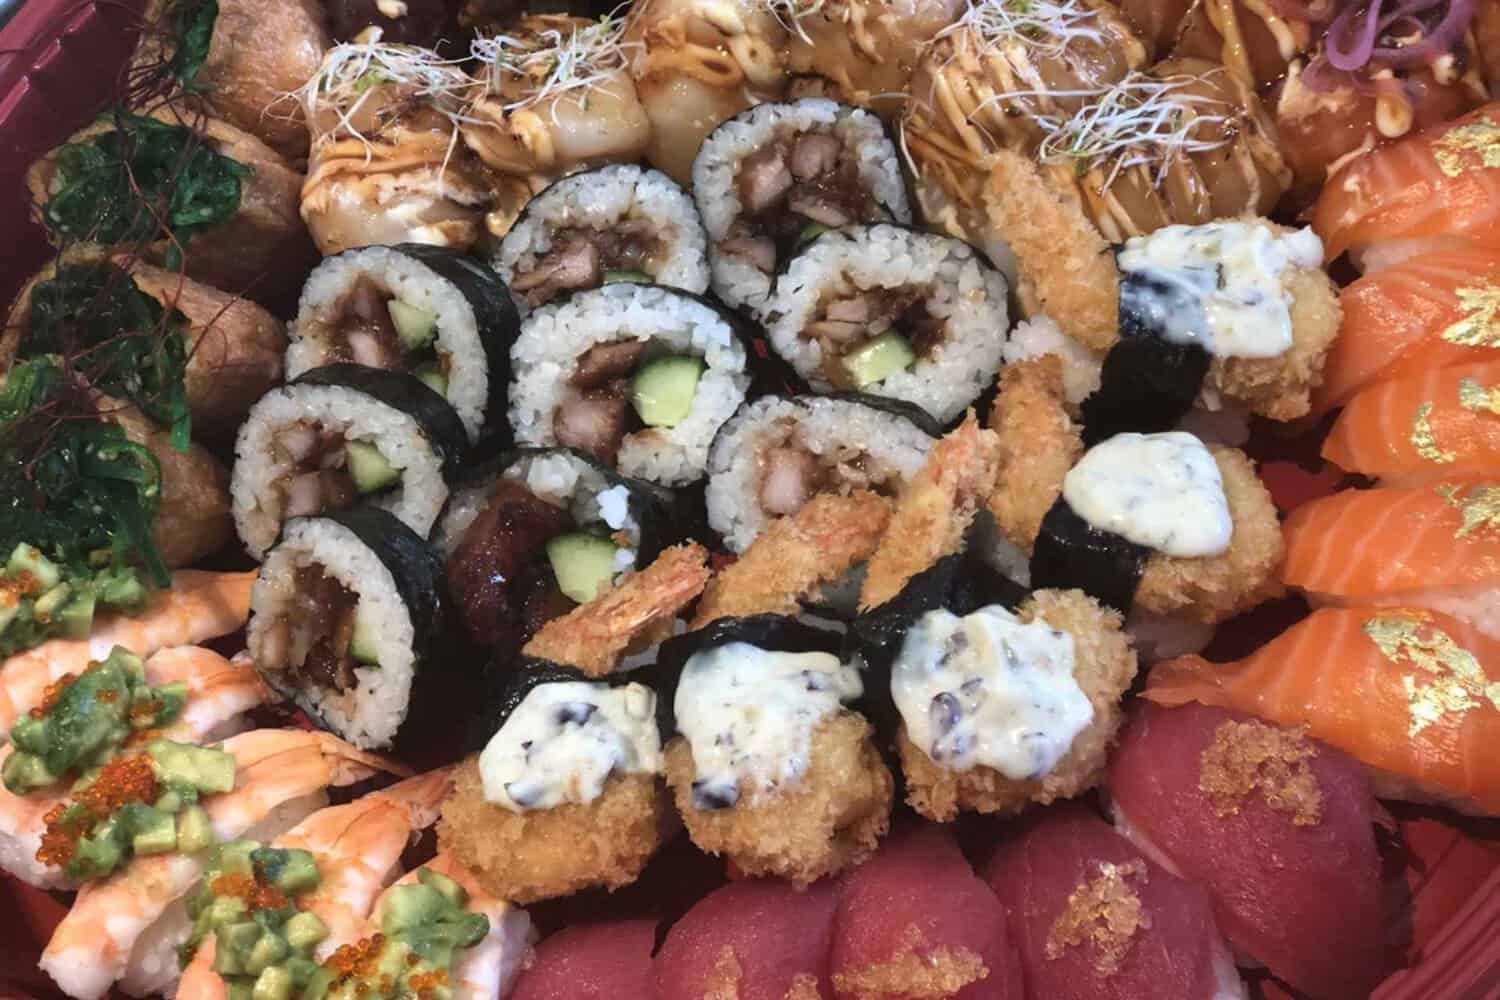 A delightful sushi plate filled with an assortment of colorful rolls, neatly arranged on a serving dish. The rolls showcase a variety of ingredients, including fresh fish, crisp vegetables, and creamy avocado, showing a tantalizing sushi takeaway option in Margaret River